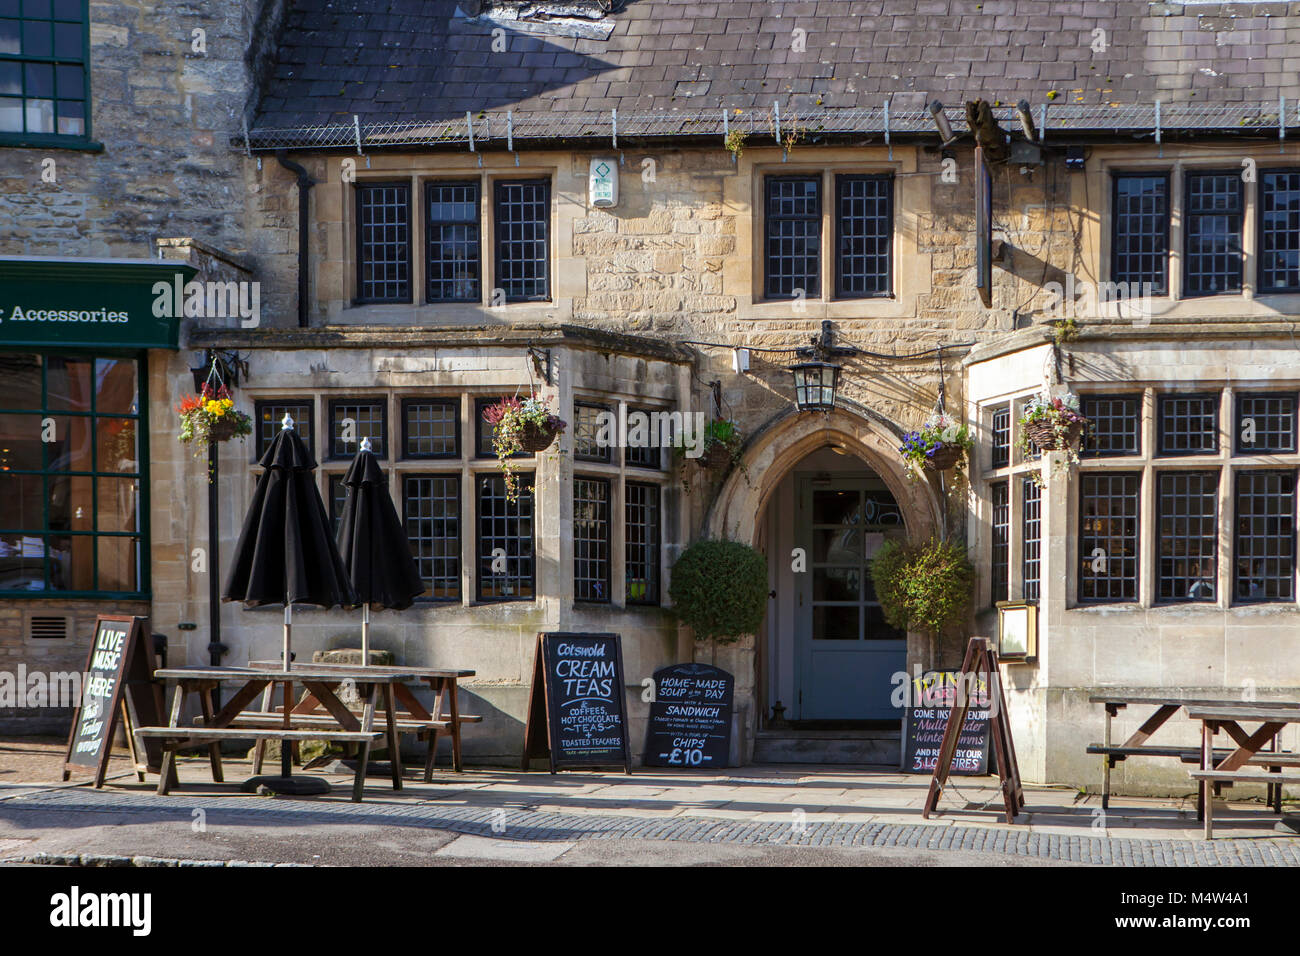 BURFORD, UK - FEBRUARY 15th, 2018: Burford is a medieval town on the River Windrush in the Cotswold hills in West Oxfordshire, England. Stock Photo